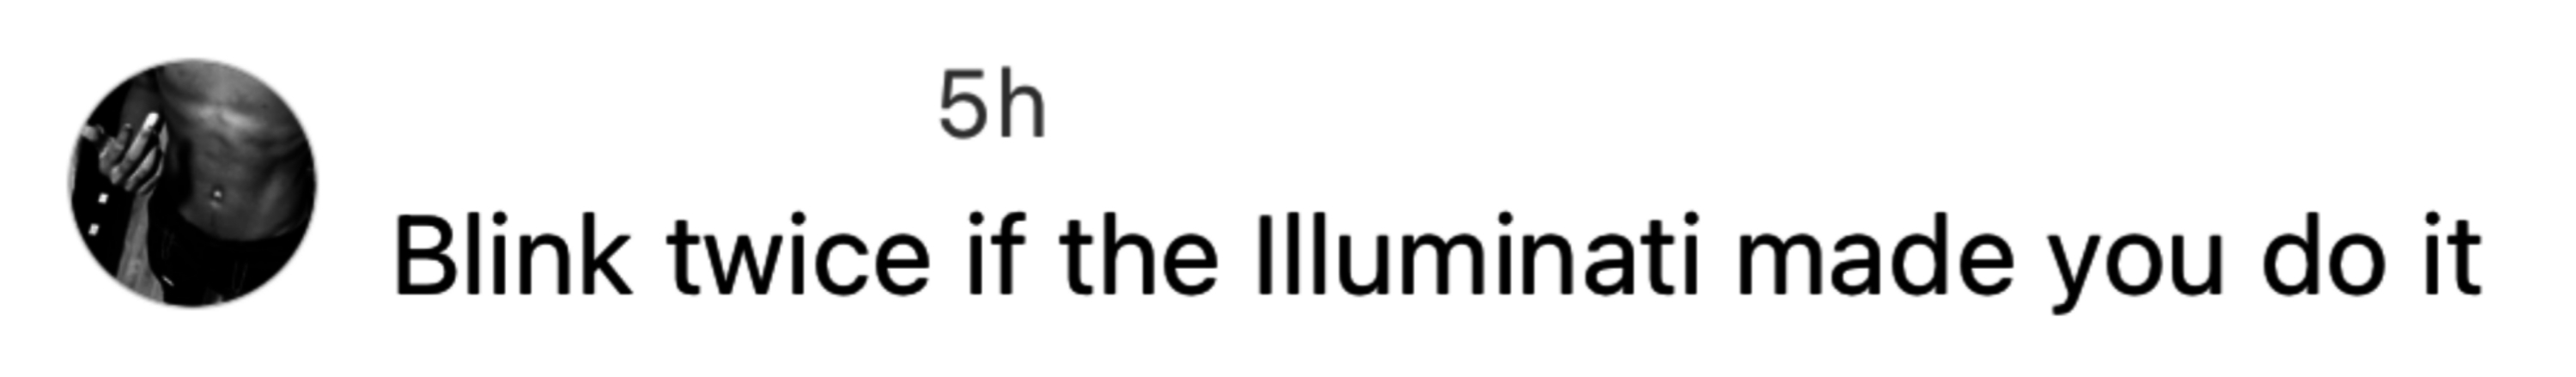 &quot;Blink twice if the Illuminati made you do it&quot;